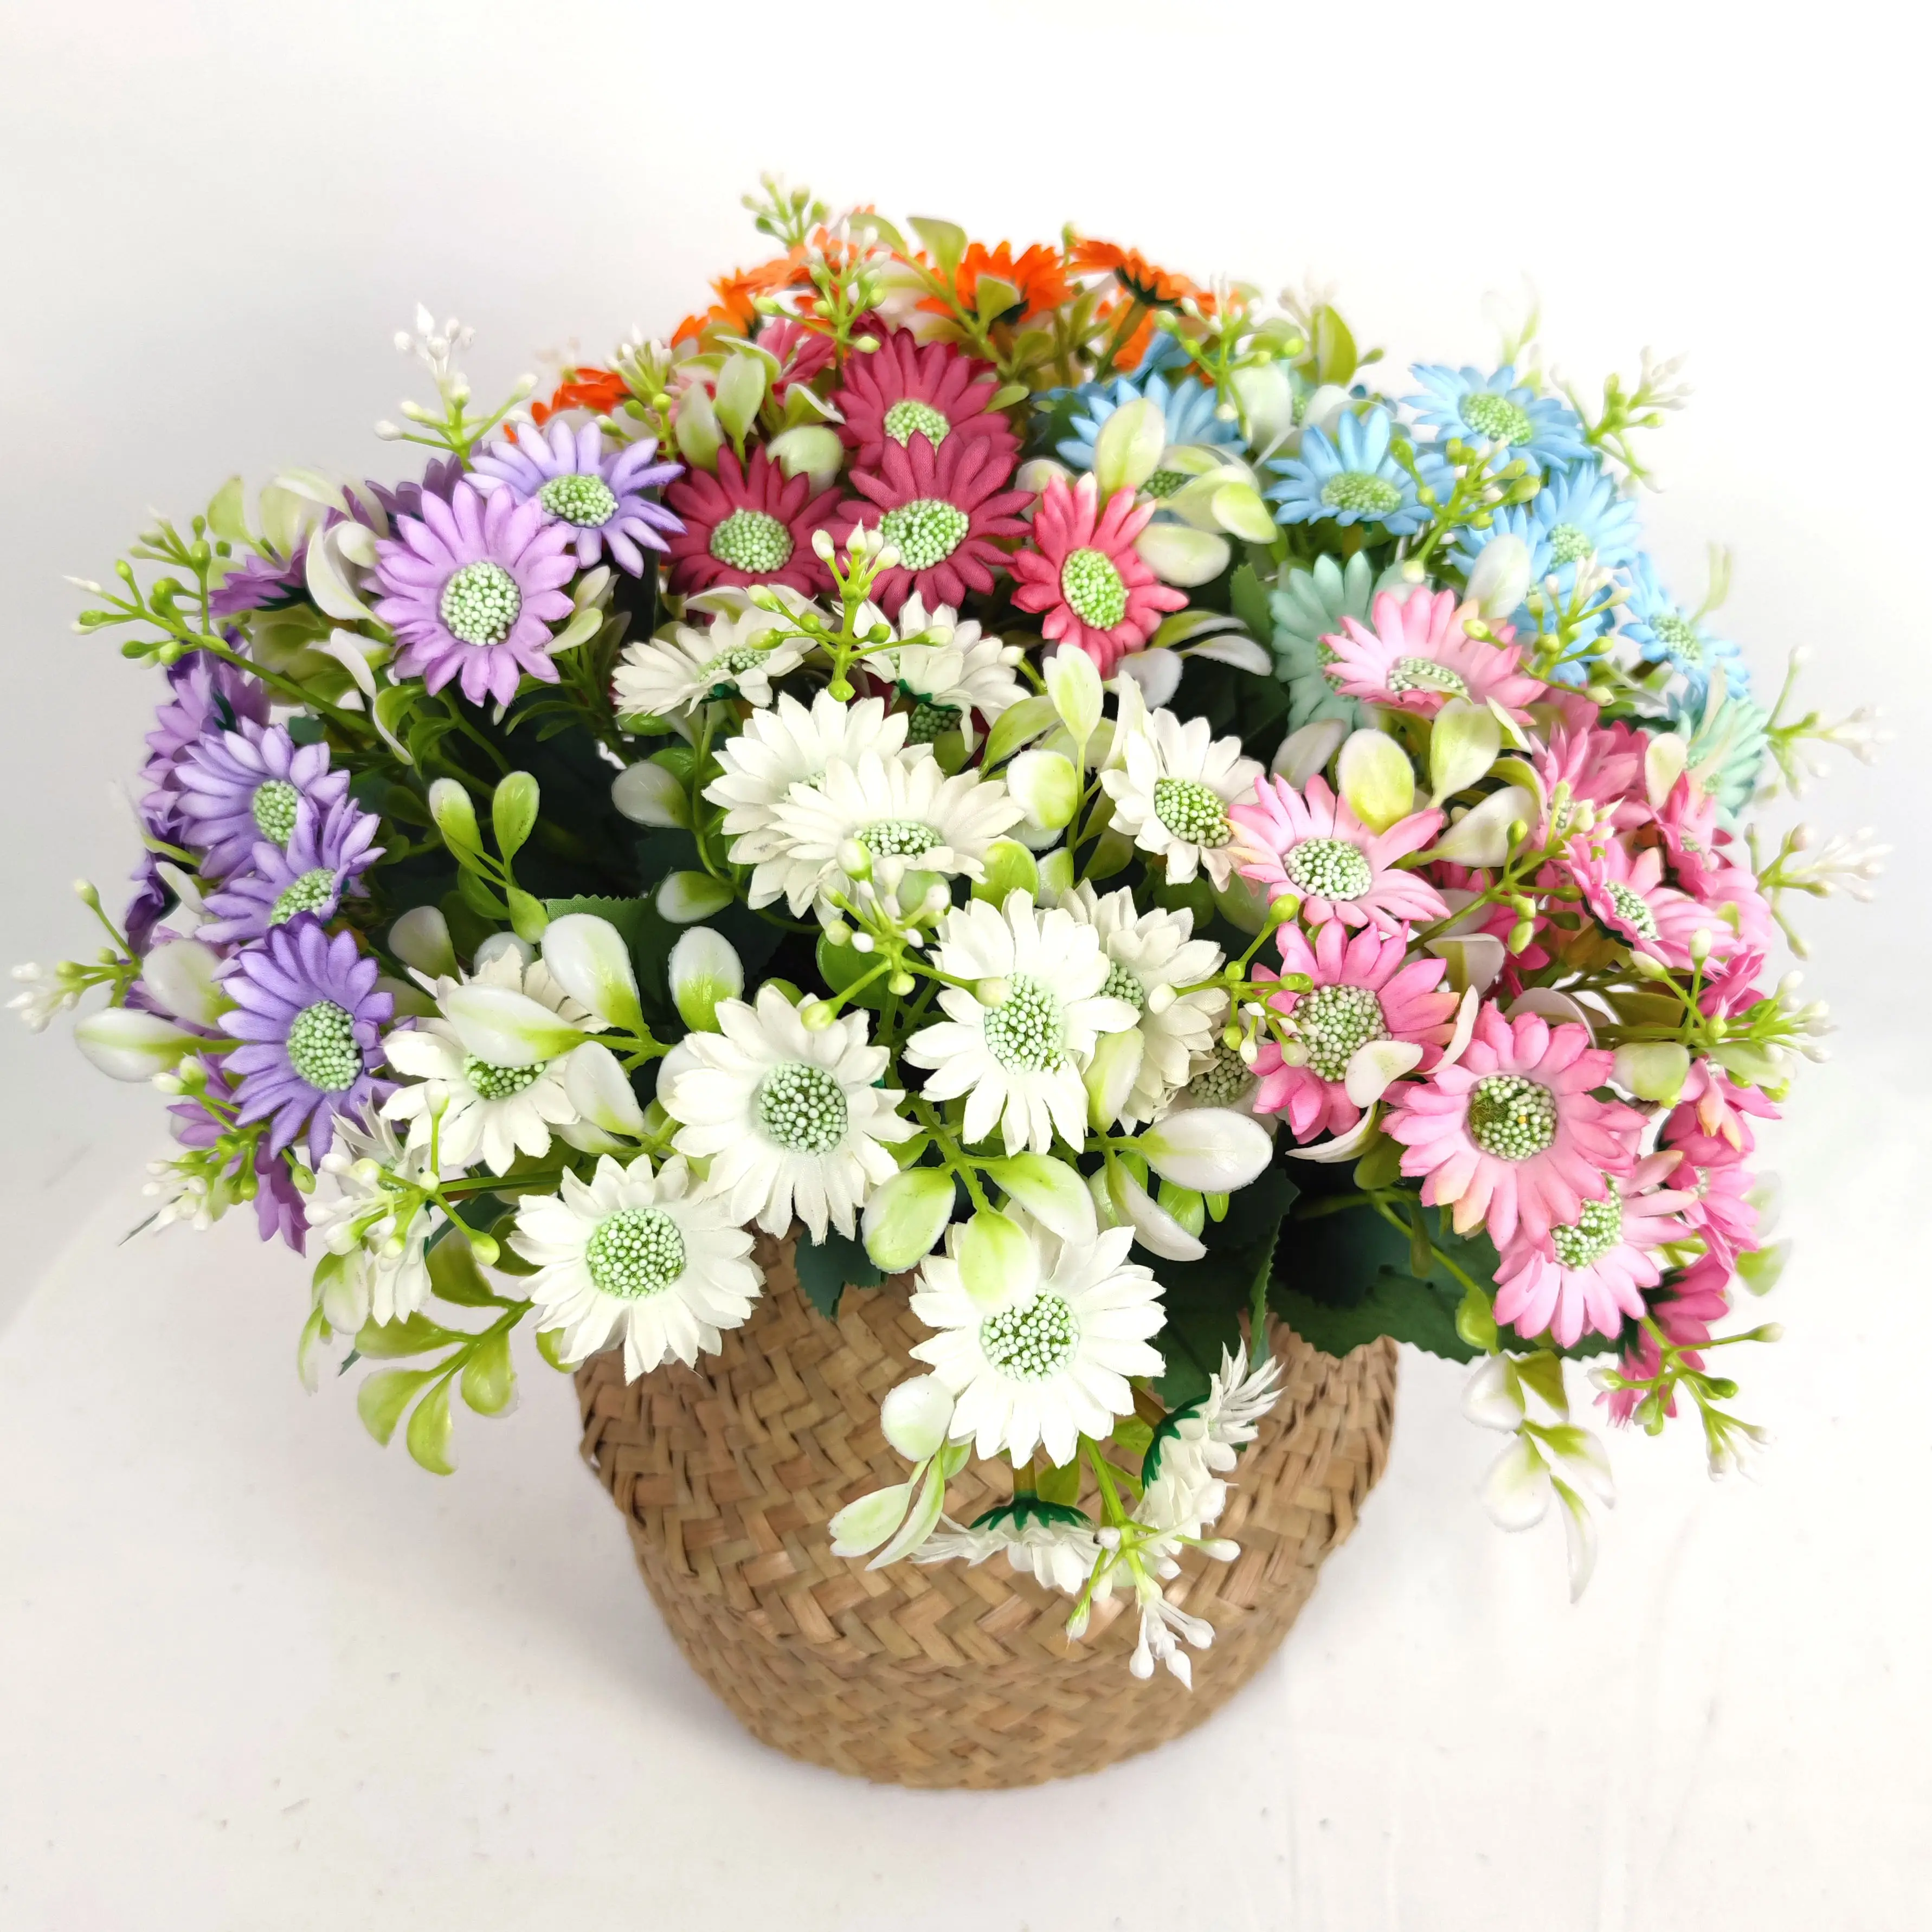 YIWAN wholesale autumn little wild chrysanthemum artificial flowers colorful chrysanthemum for home wedding decoration